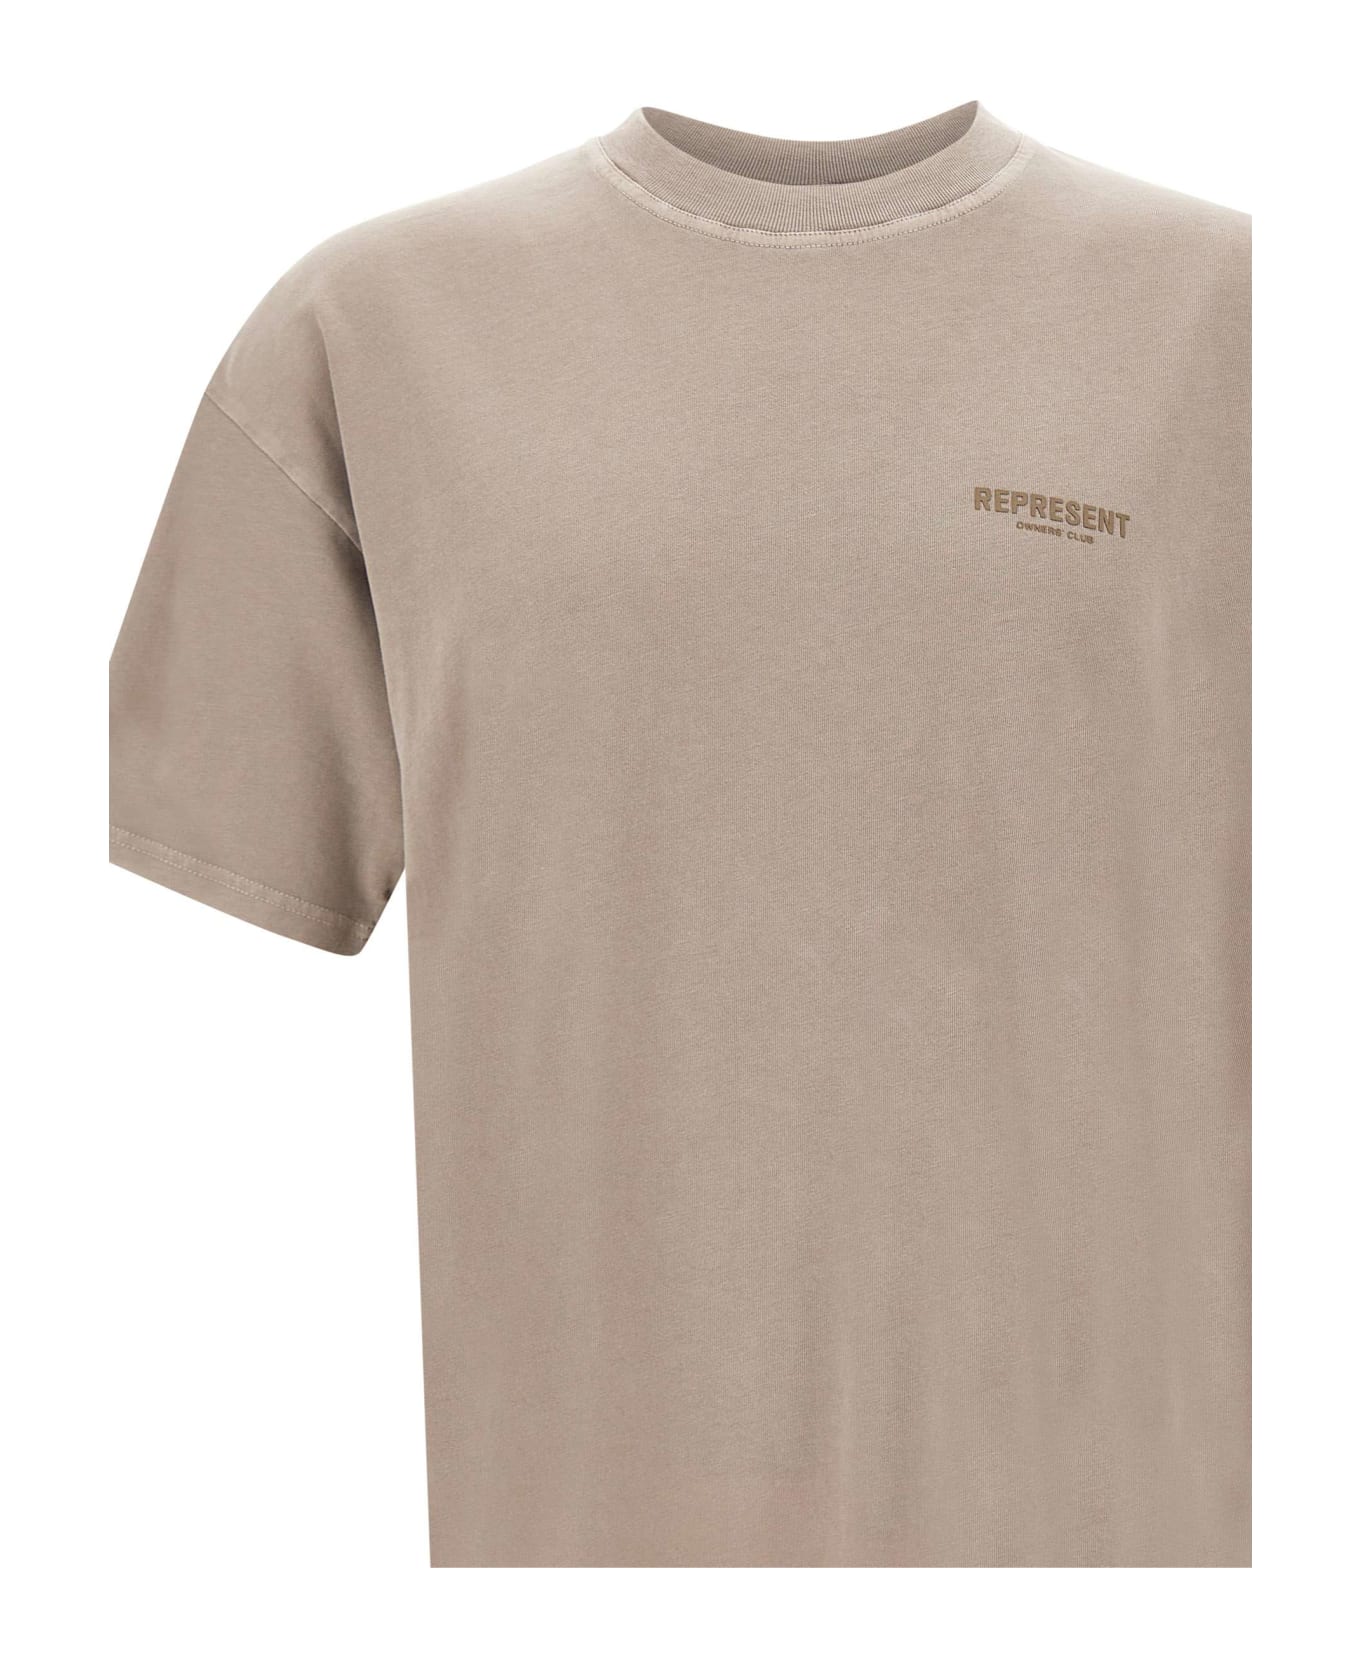 REPRESENT "owners Club" Cotton T-shirt - BEIGE シャツ